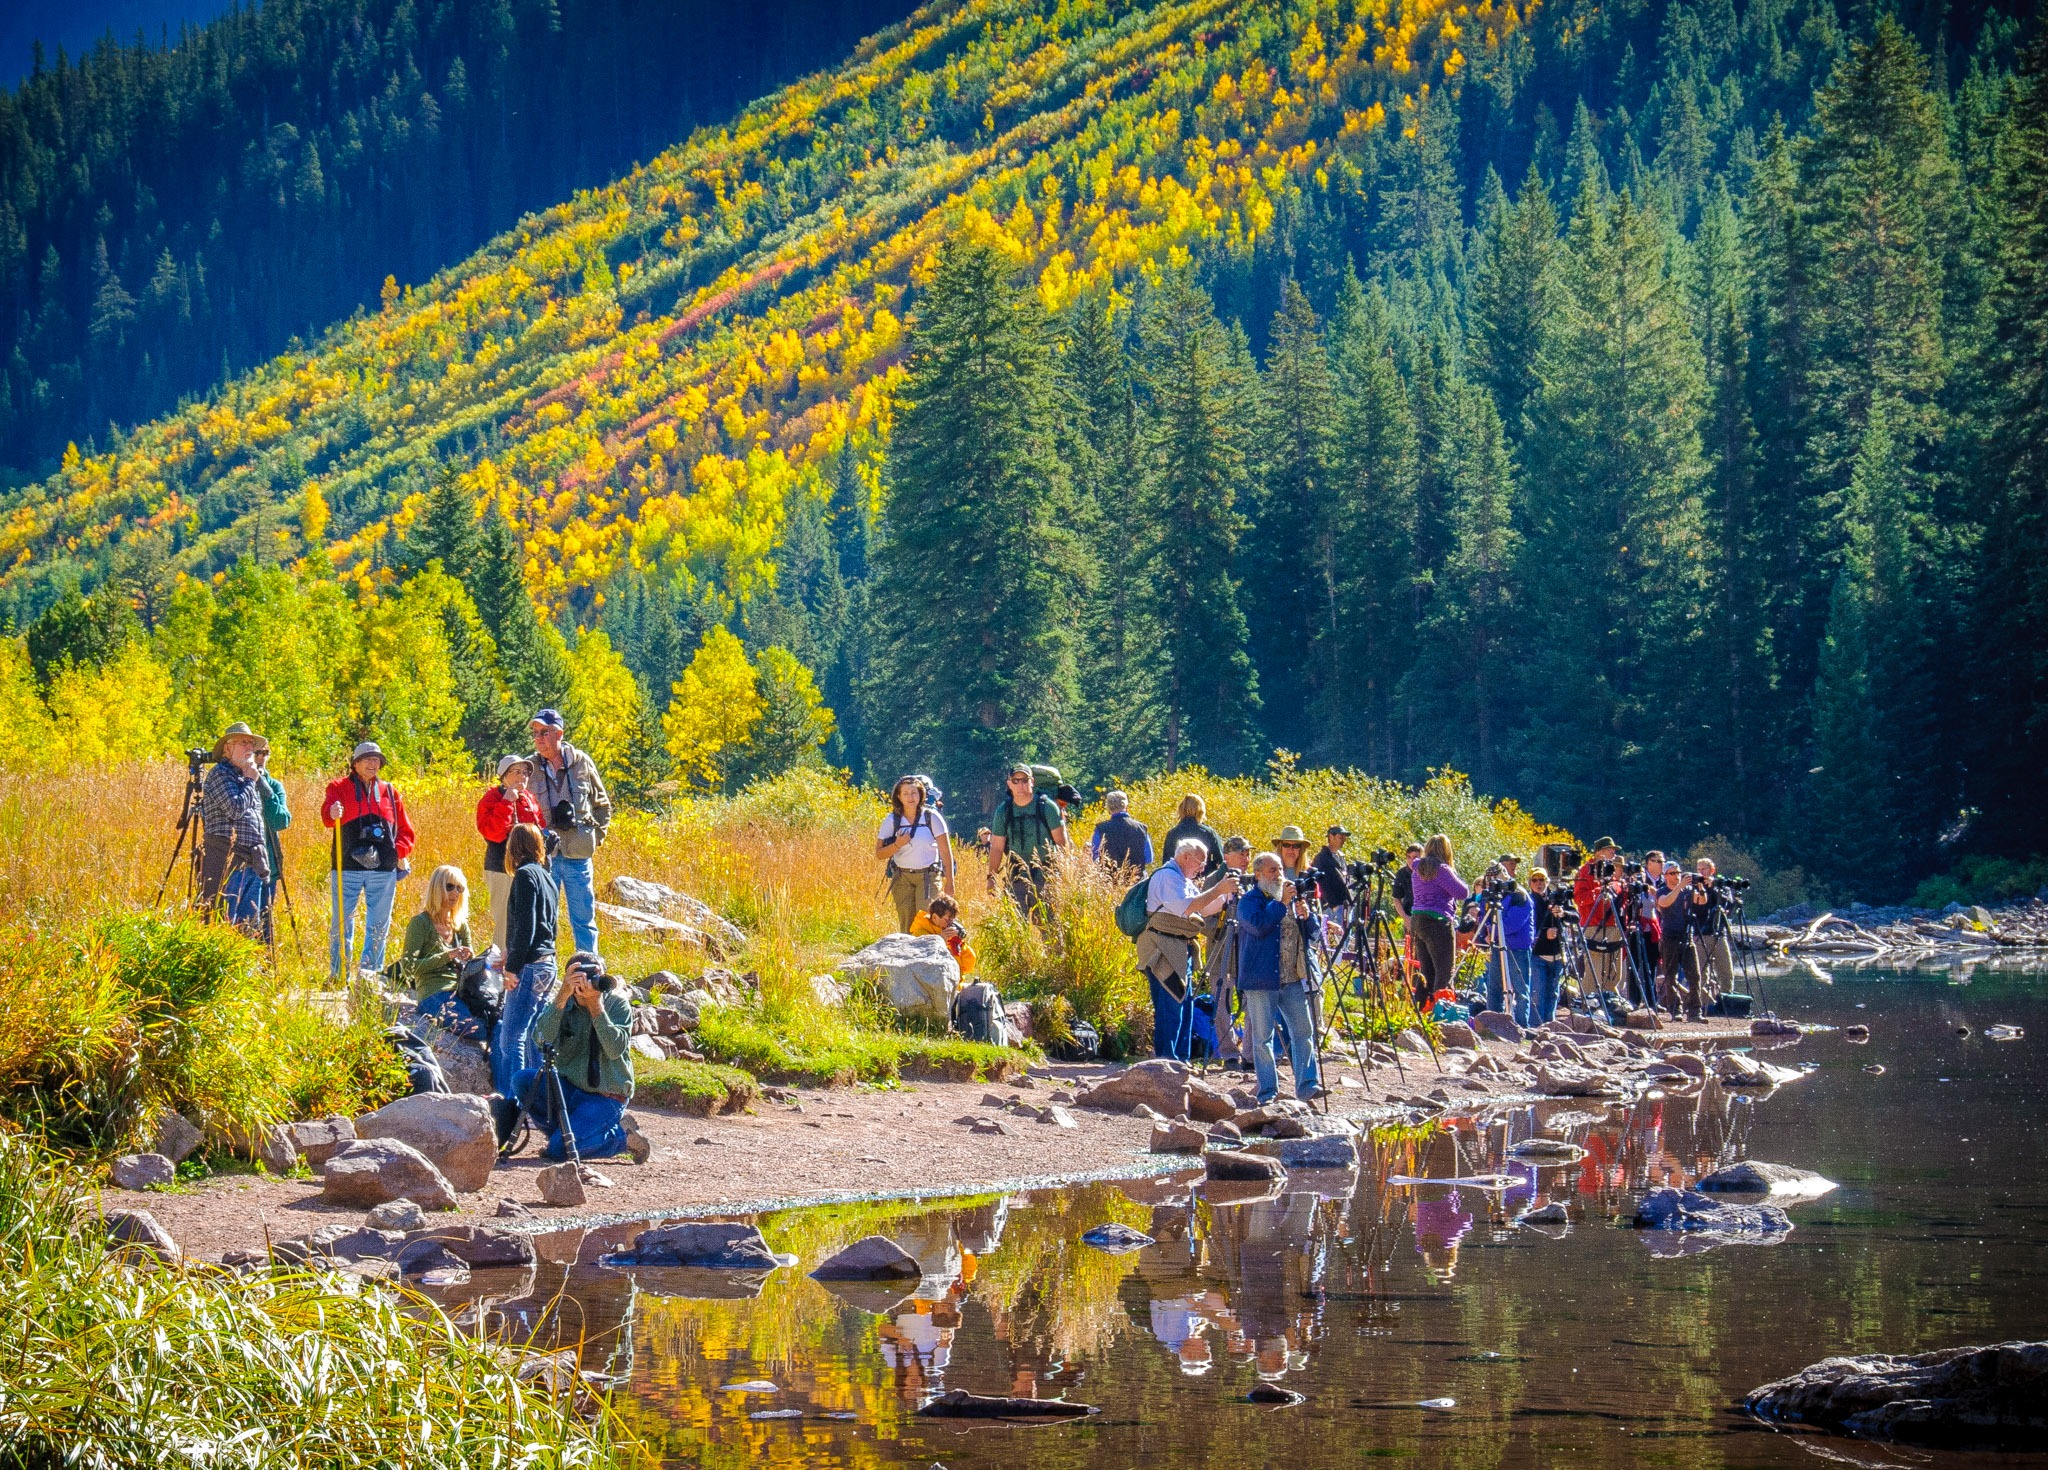 A group of photographers trying for shots of the Maroon Bells in the Maroon Bells Recreation Area near Aspen, Colorado.